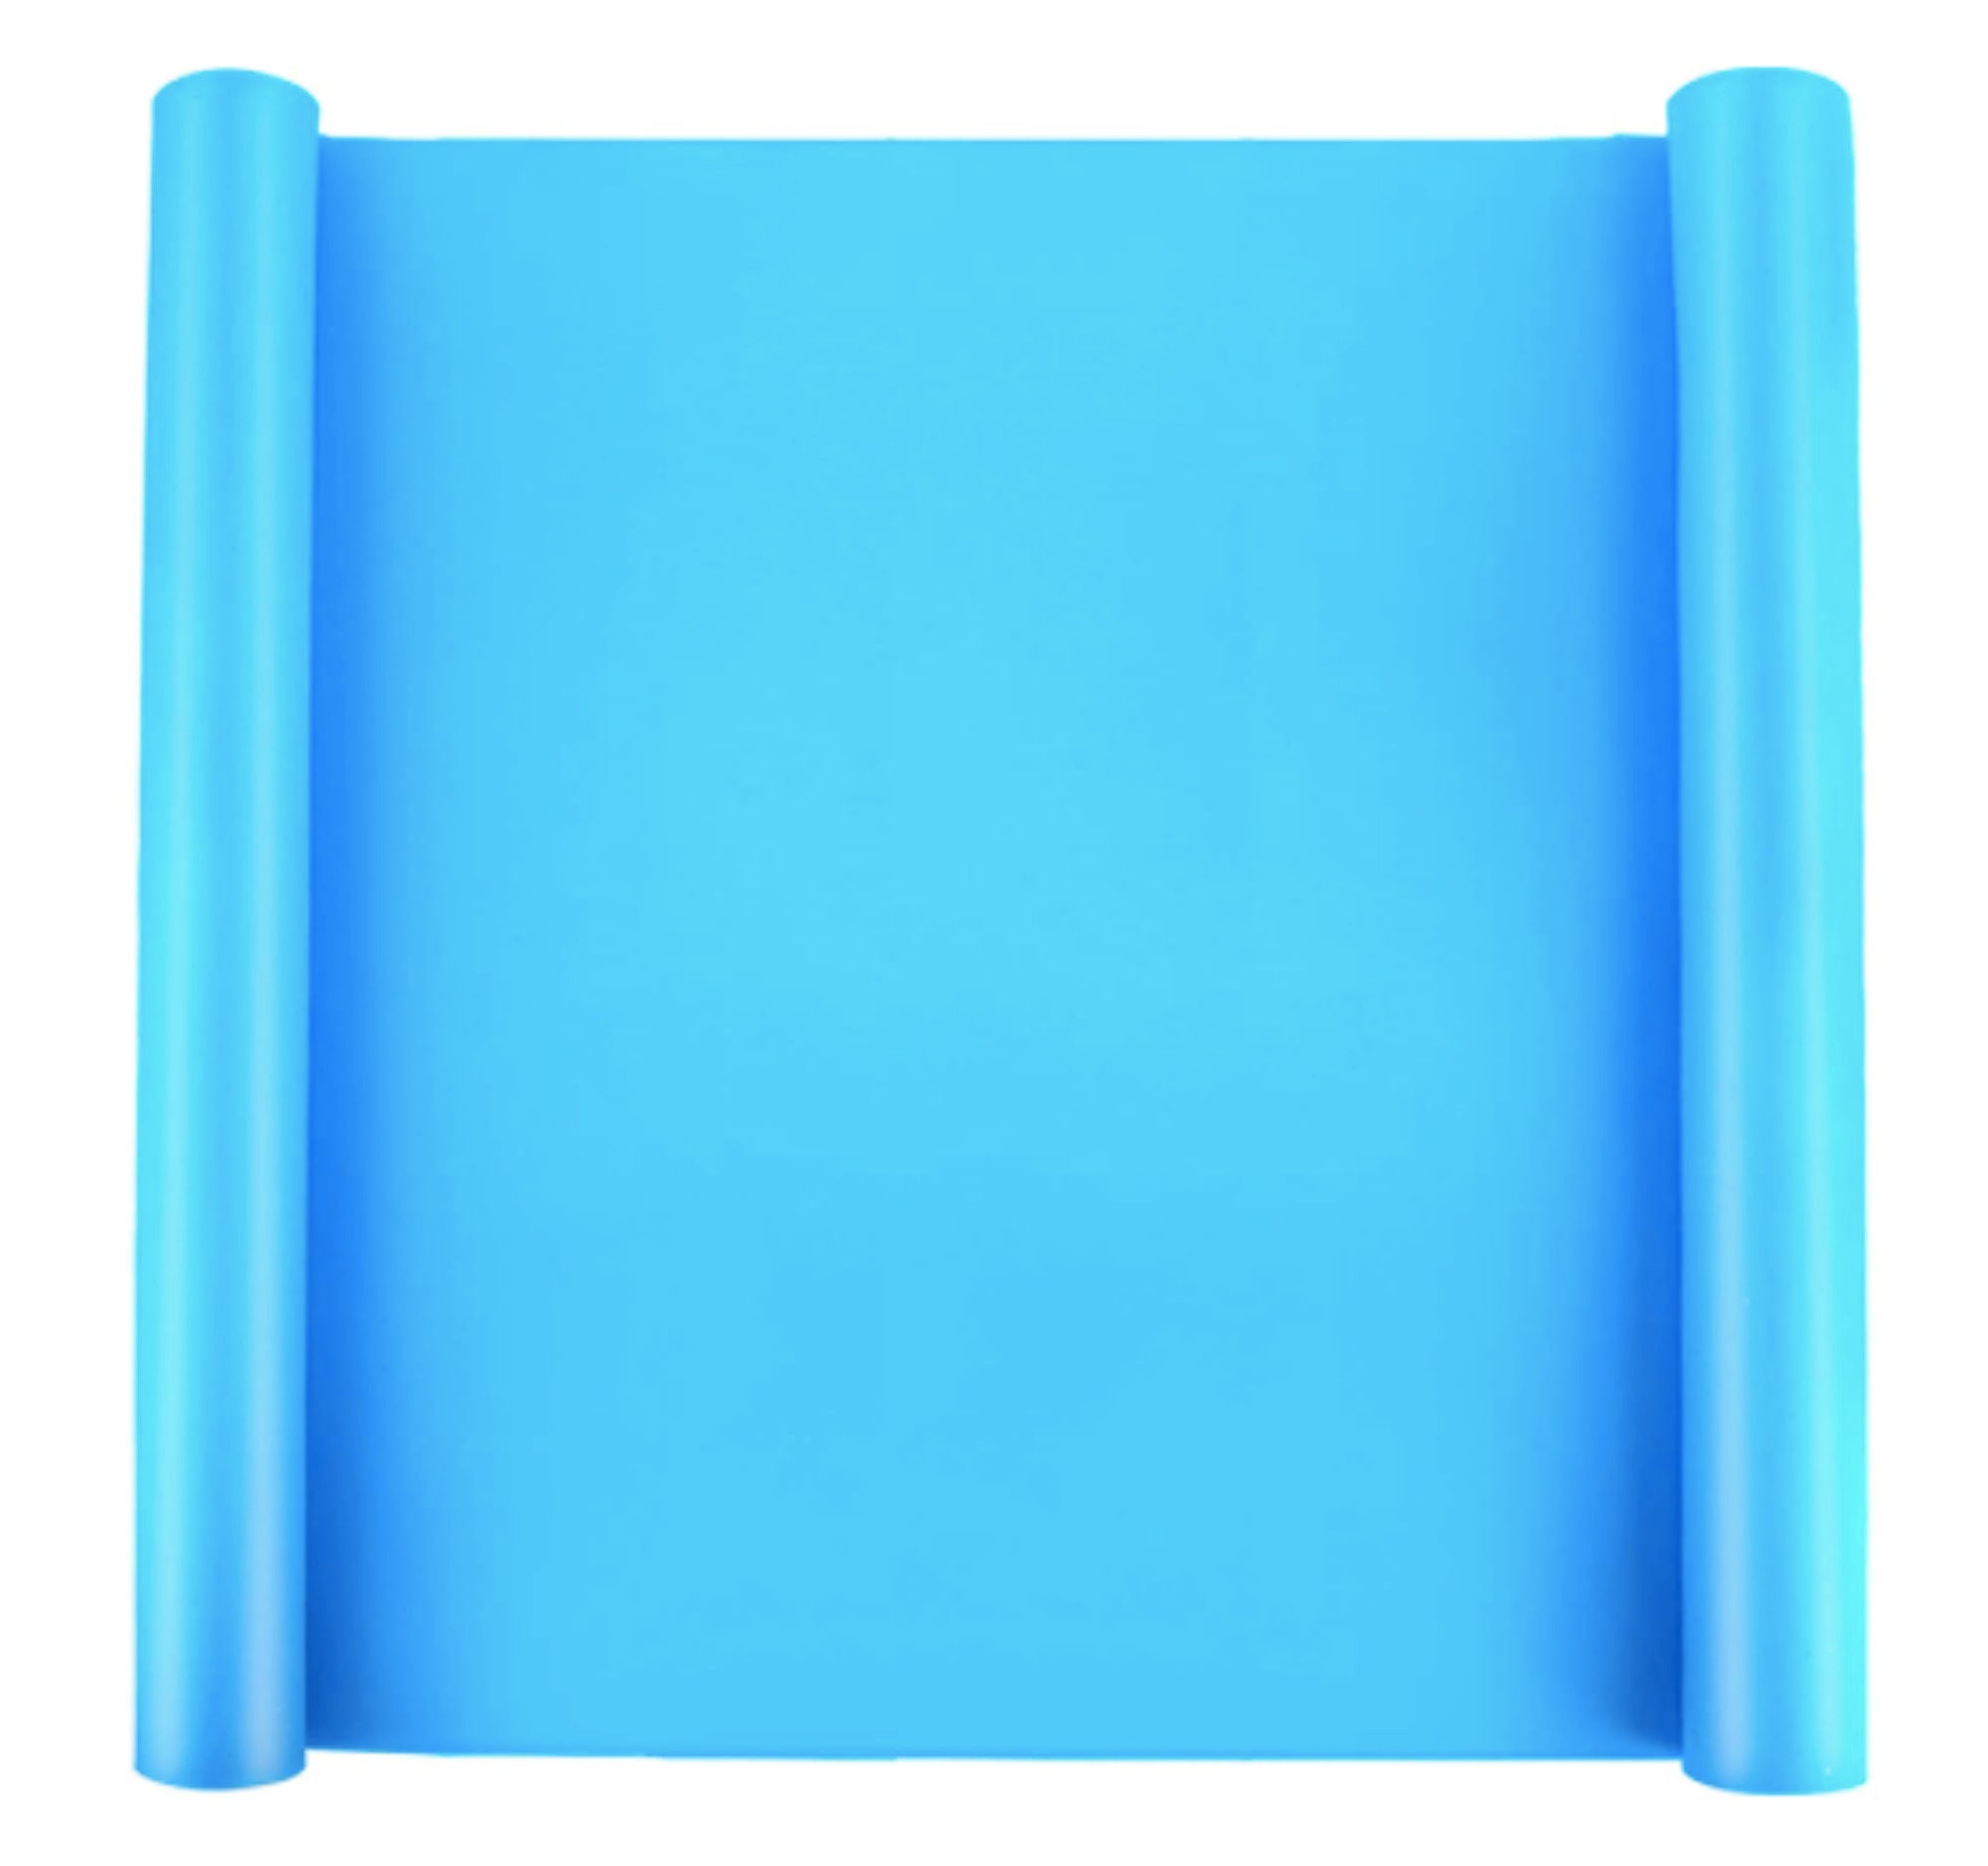 Silicone Mats for Crafts,Non-Stick Silicone Sheet Silicone Craft